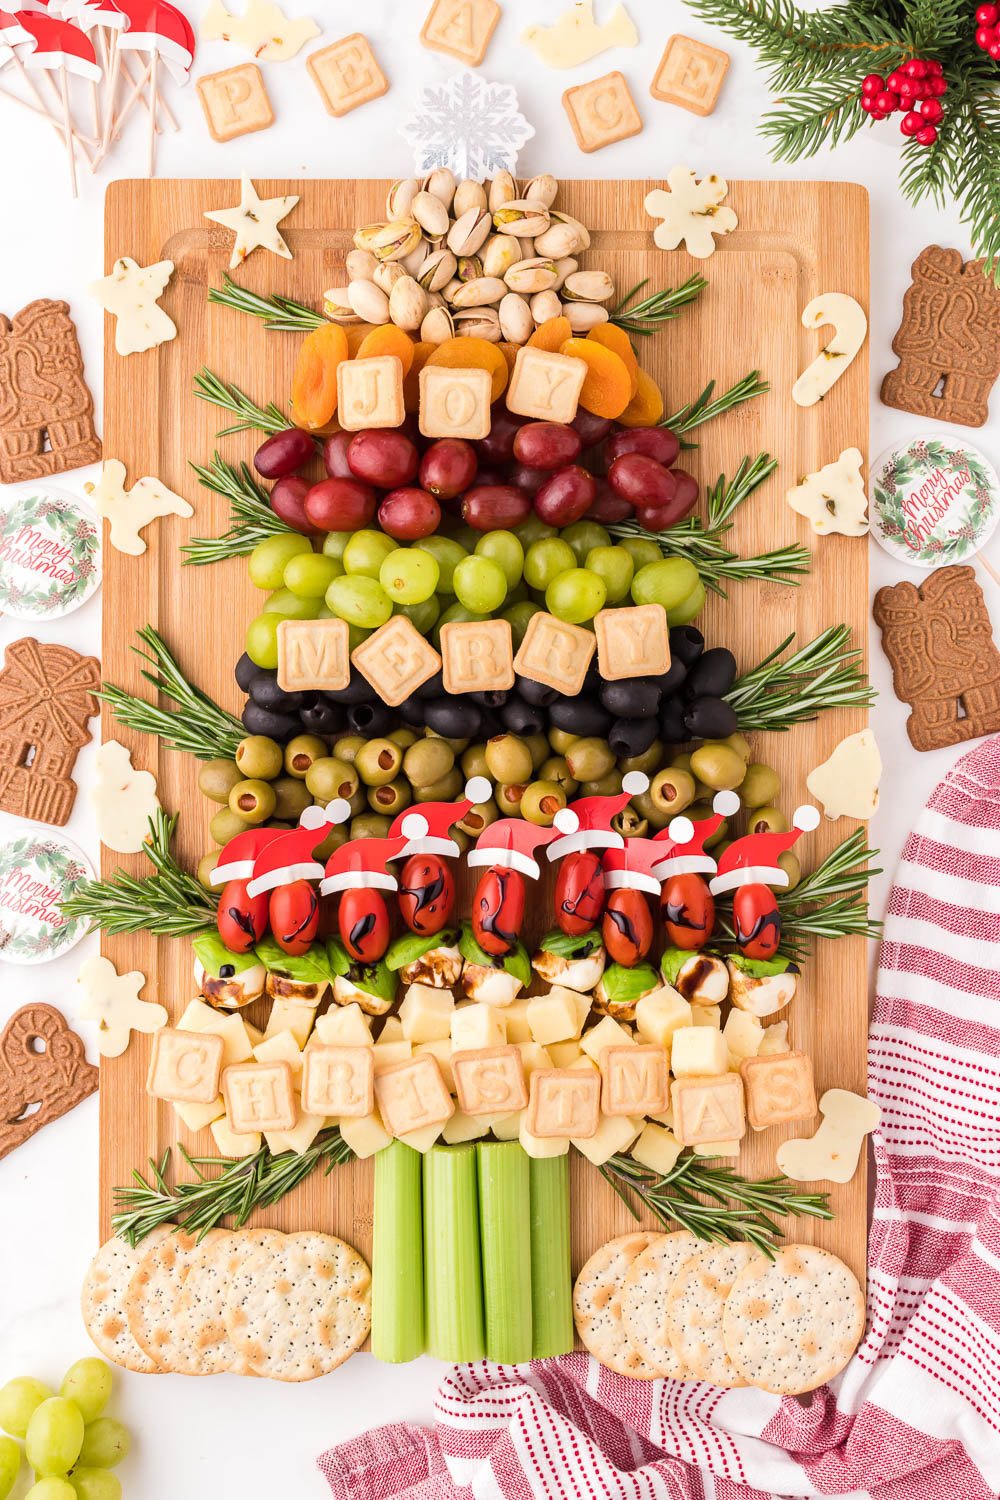 A wooden board with snacks, fruits and food in the shape of a Christmas tree with cookies and signs around it.